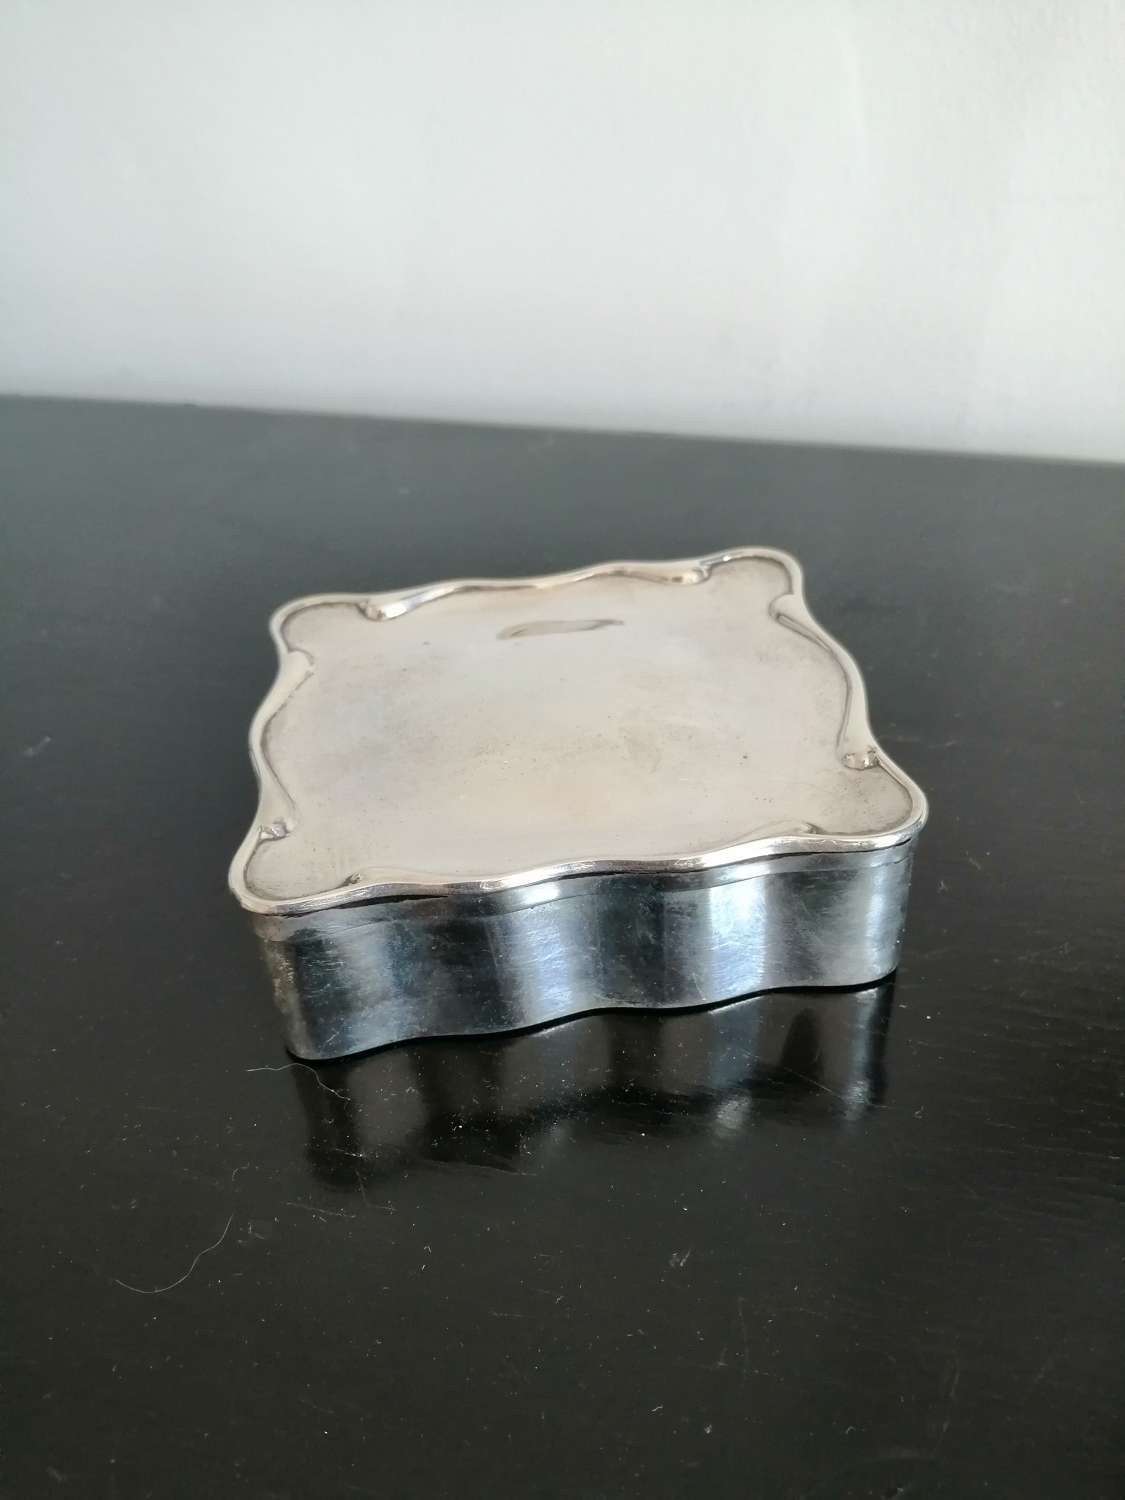 A silver serpentine shaped ring / jewellery box